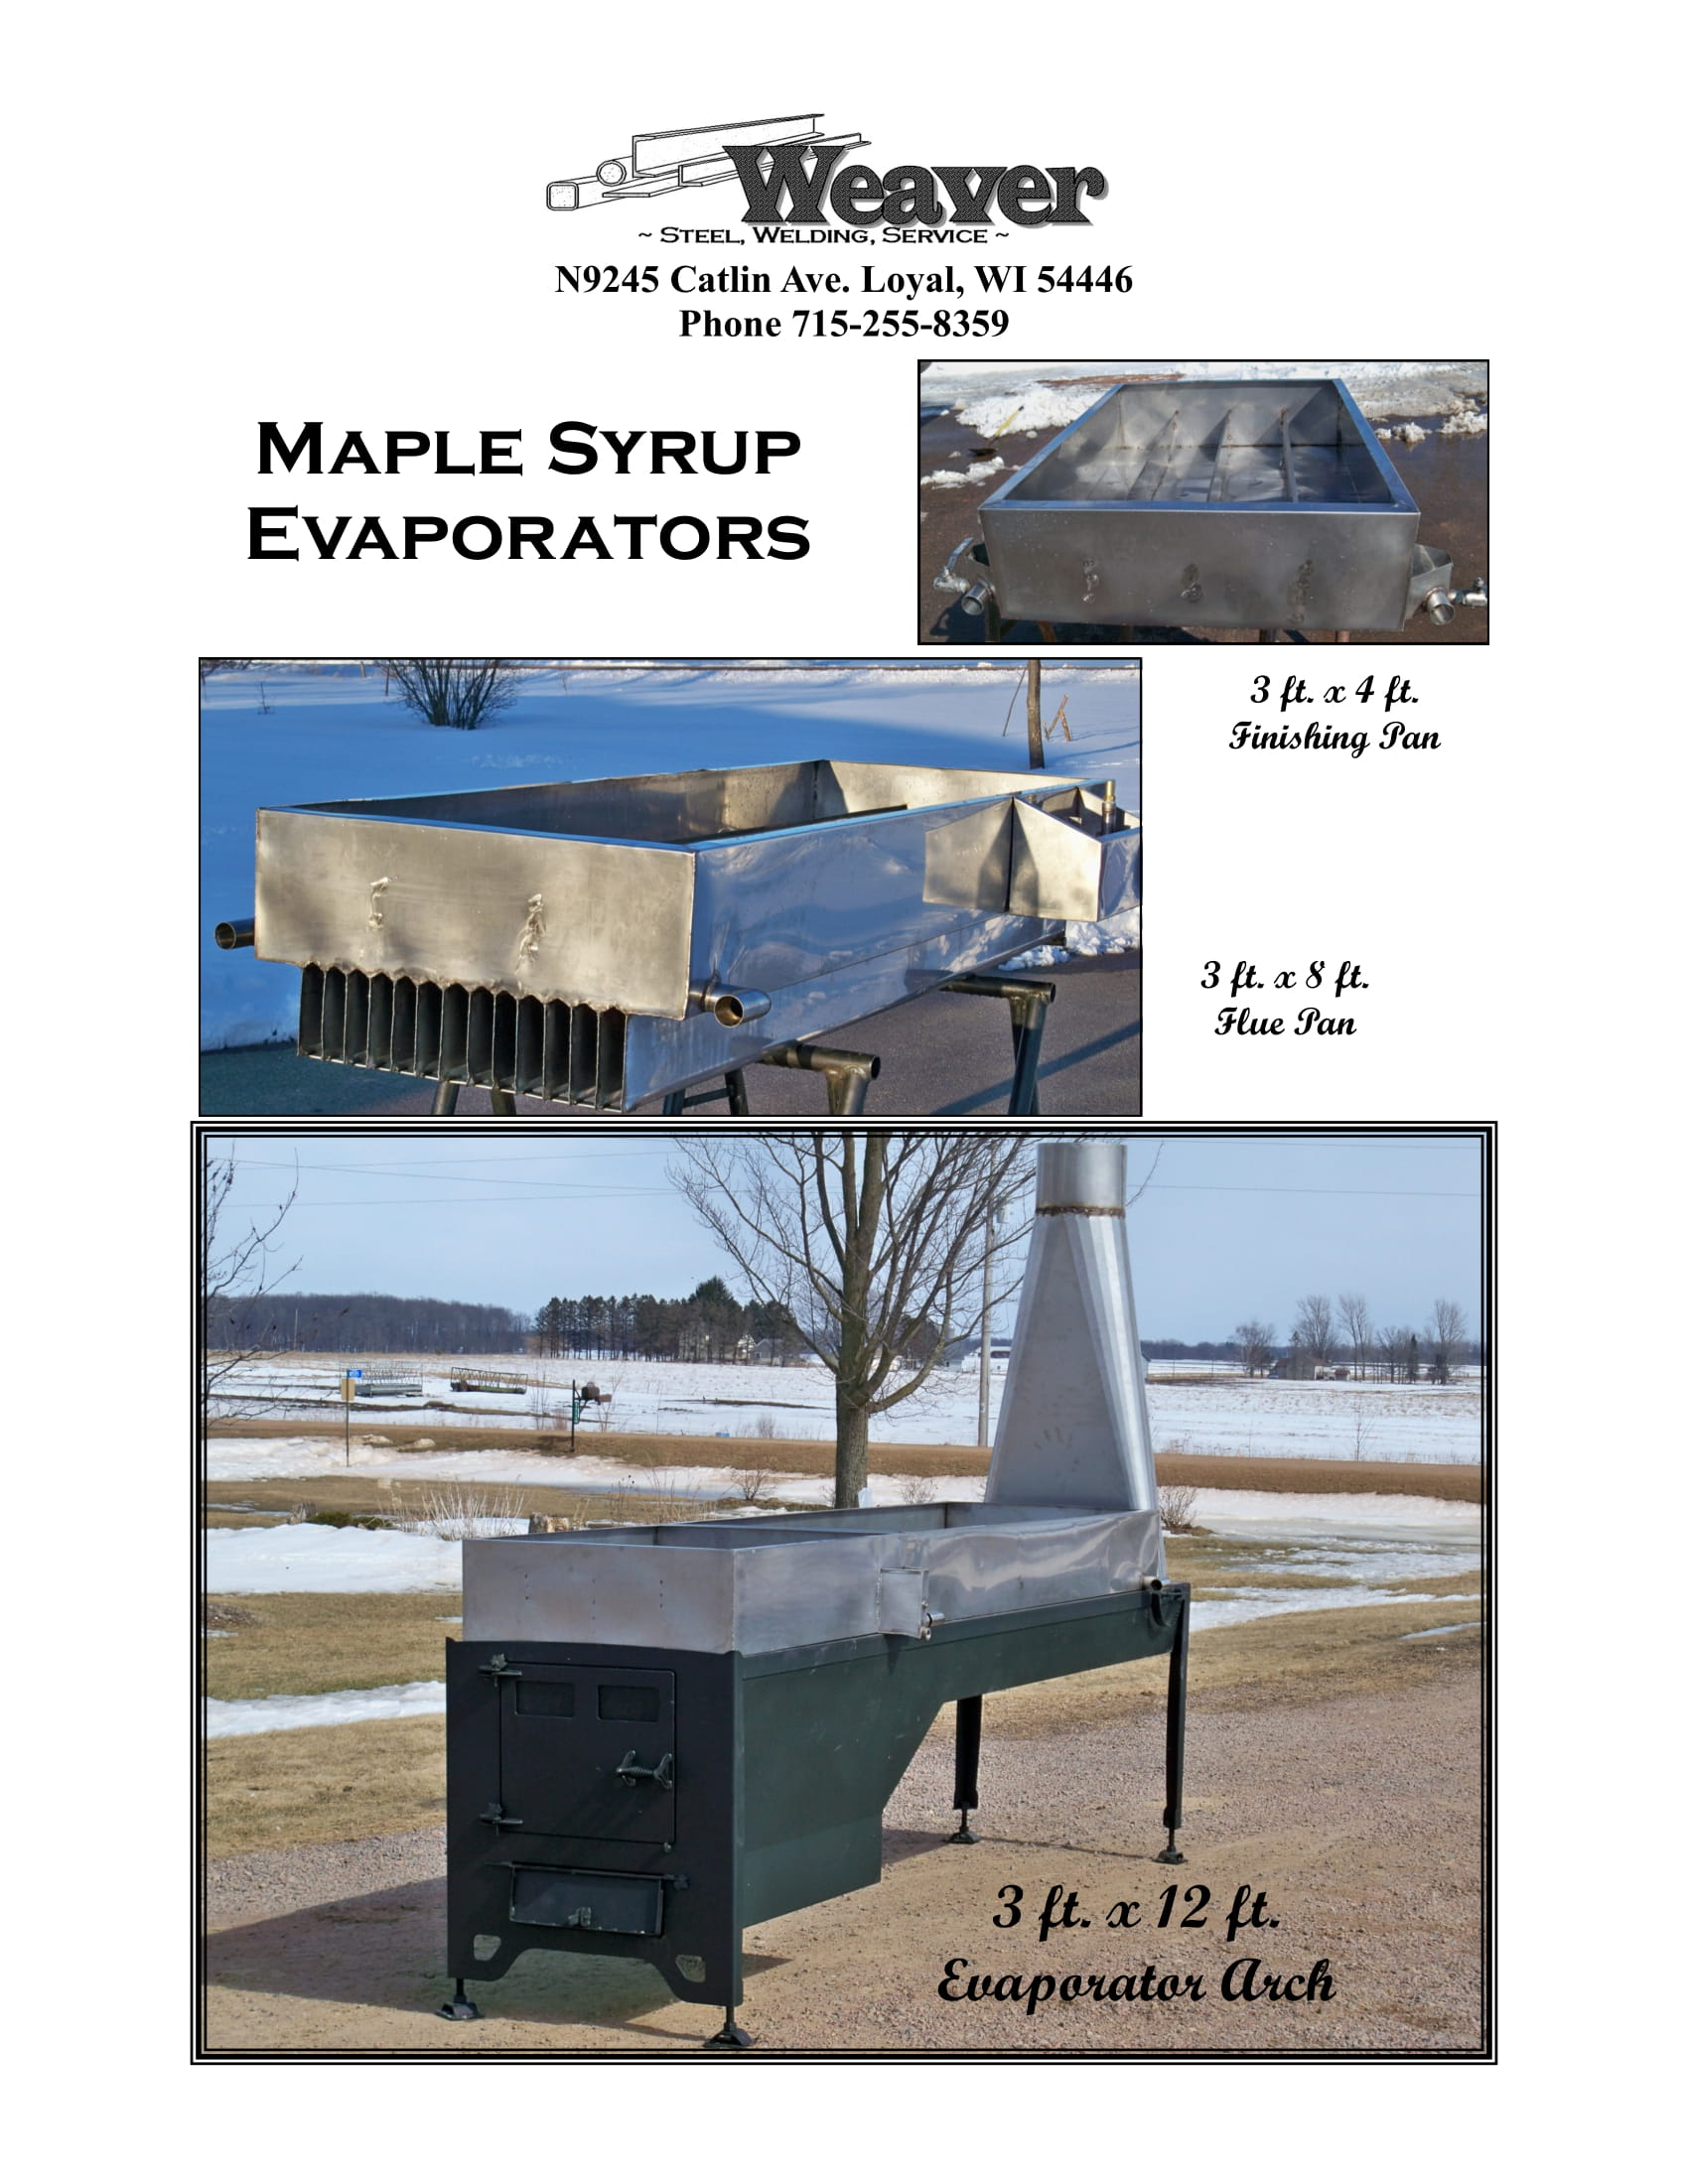 Maple Syrup Evaporators Large 3 ft x 12 ft